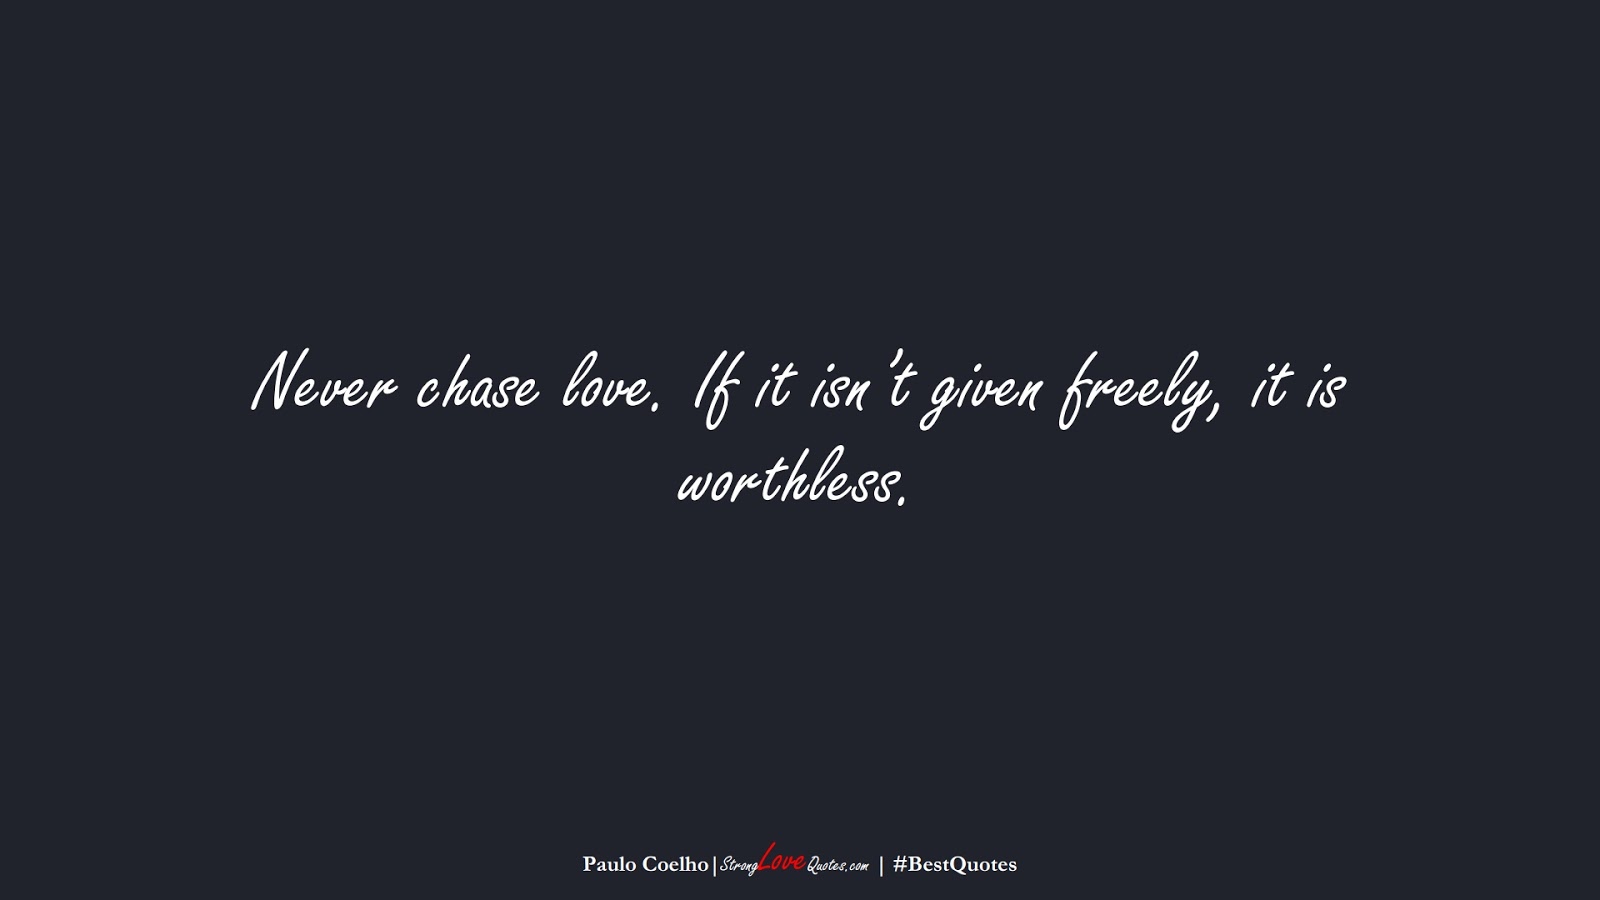 Never chase love. If it isn’t given freely, it is worthless. (Paulo Coelho);  #BestQuotes